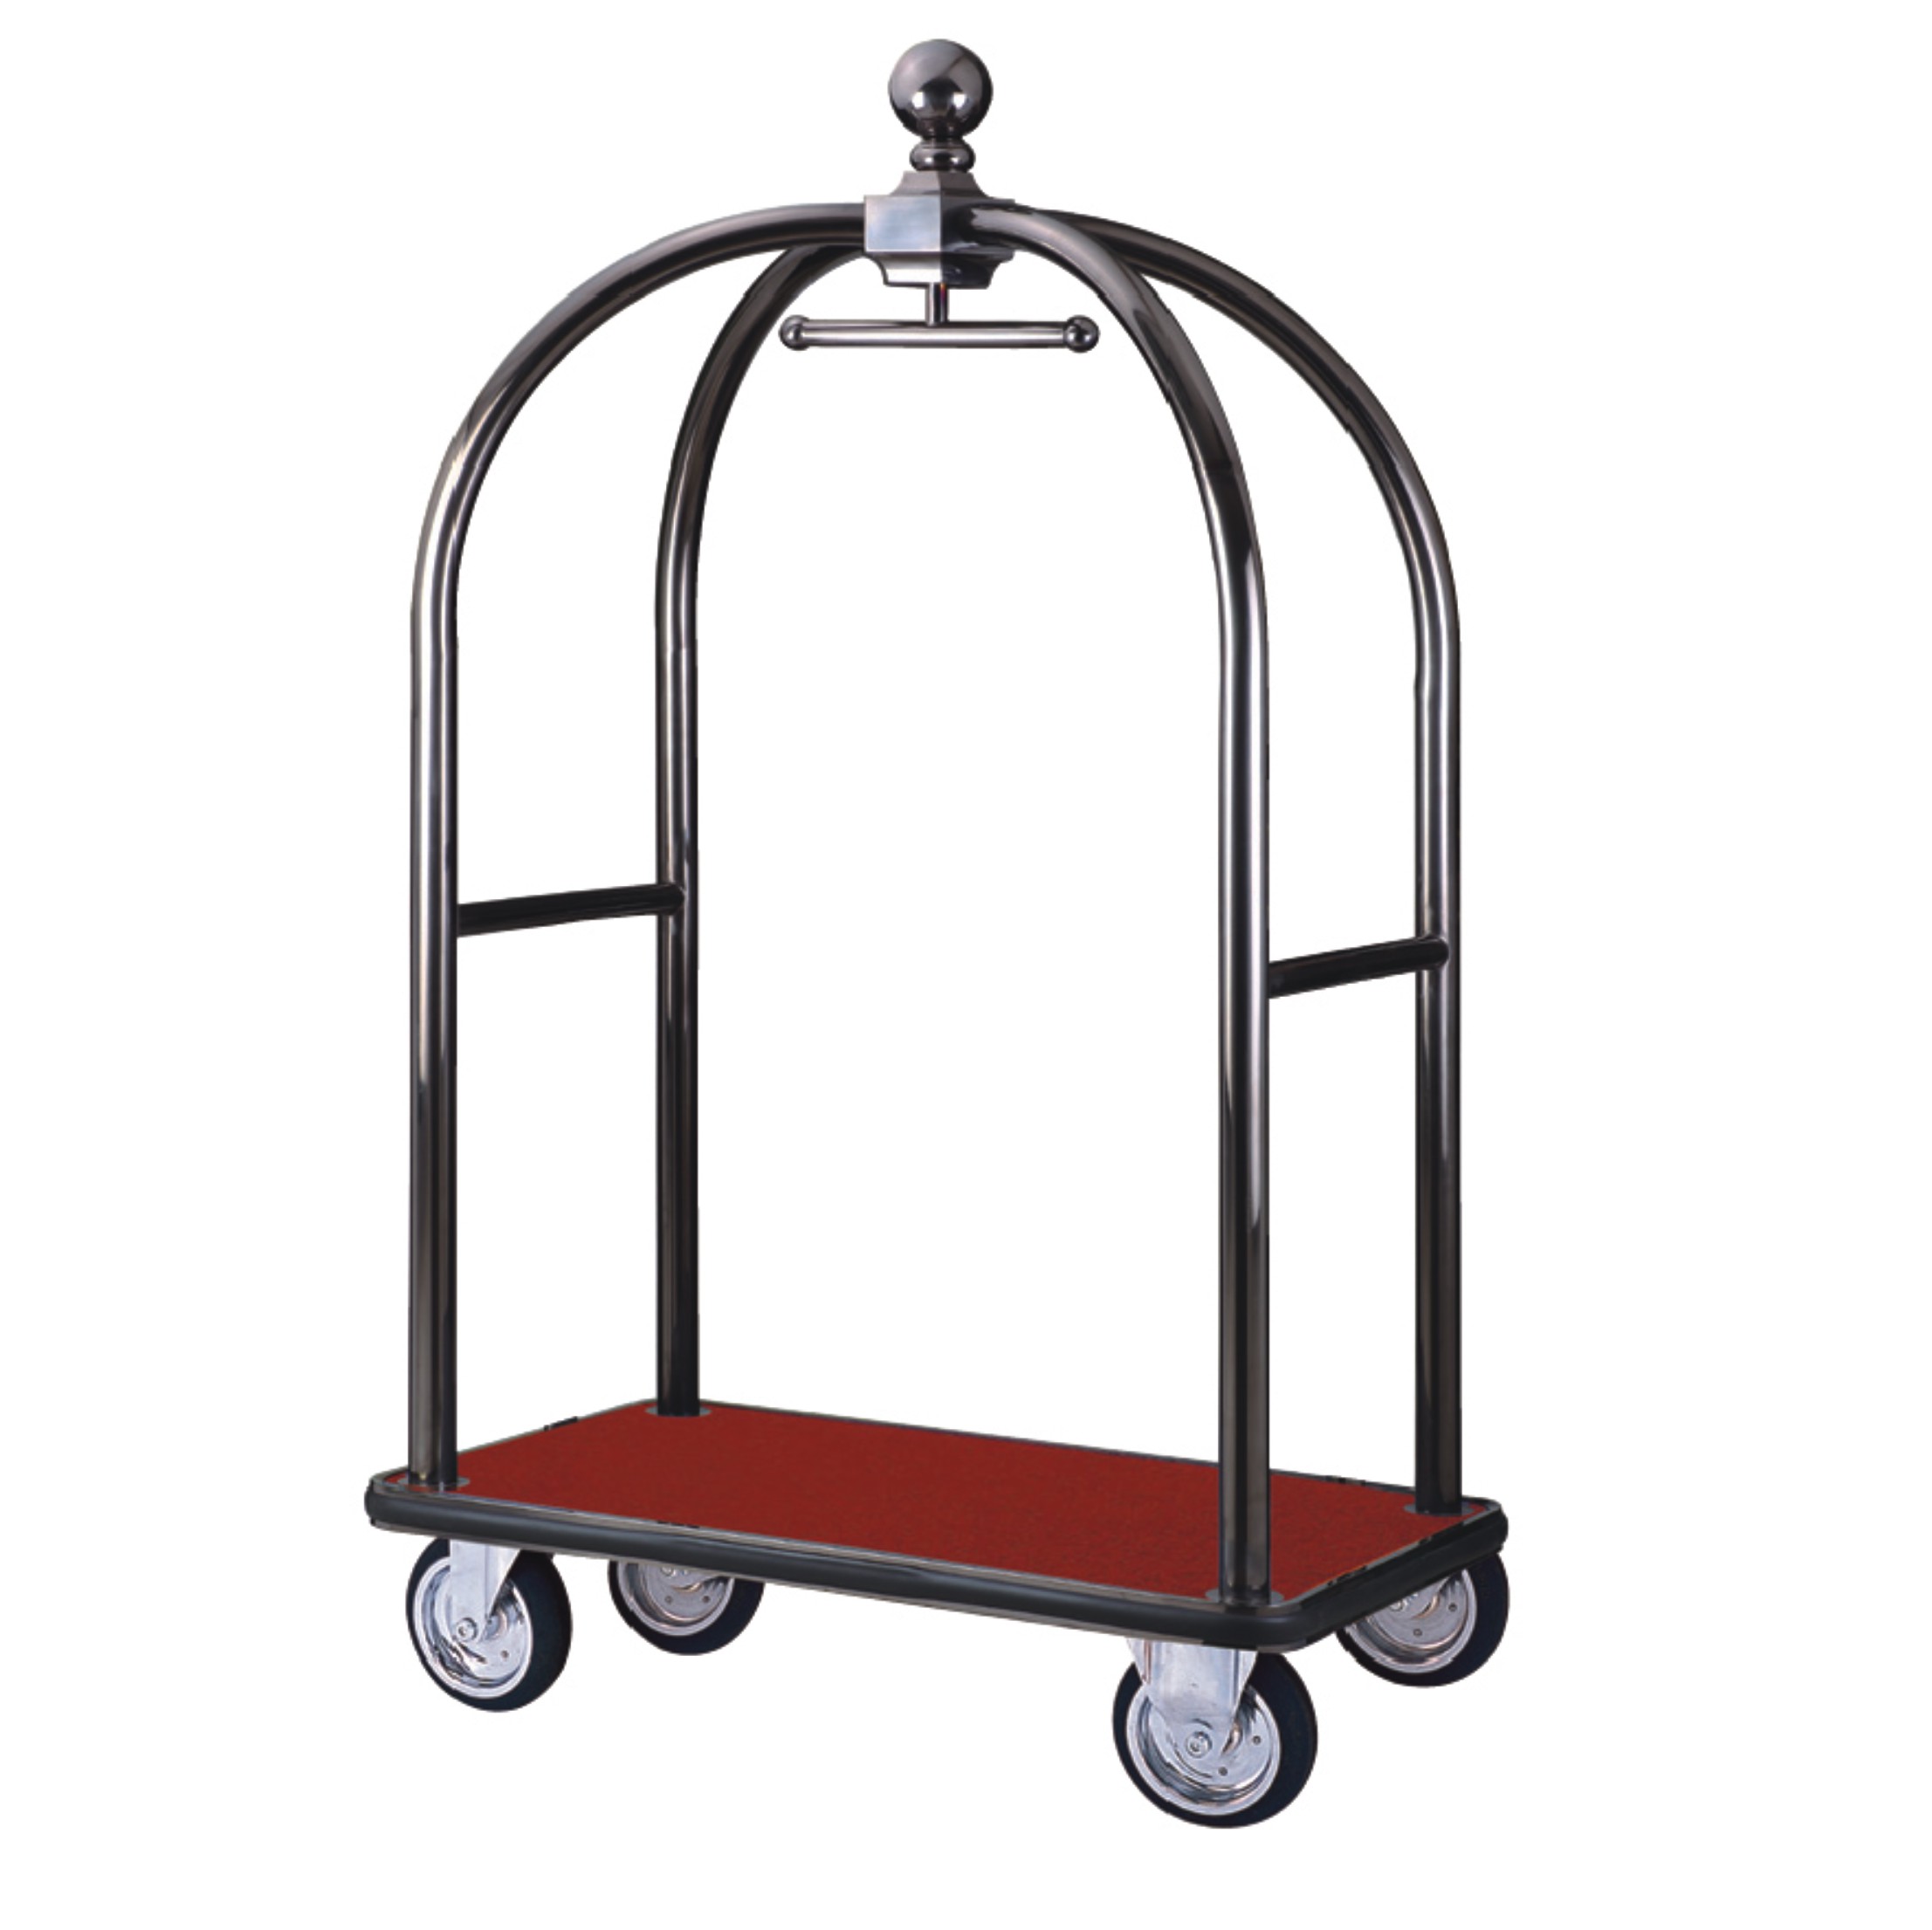 Luggage carrier at hotel